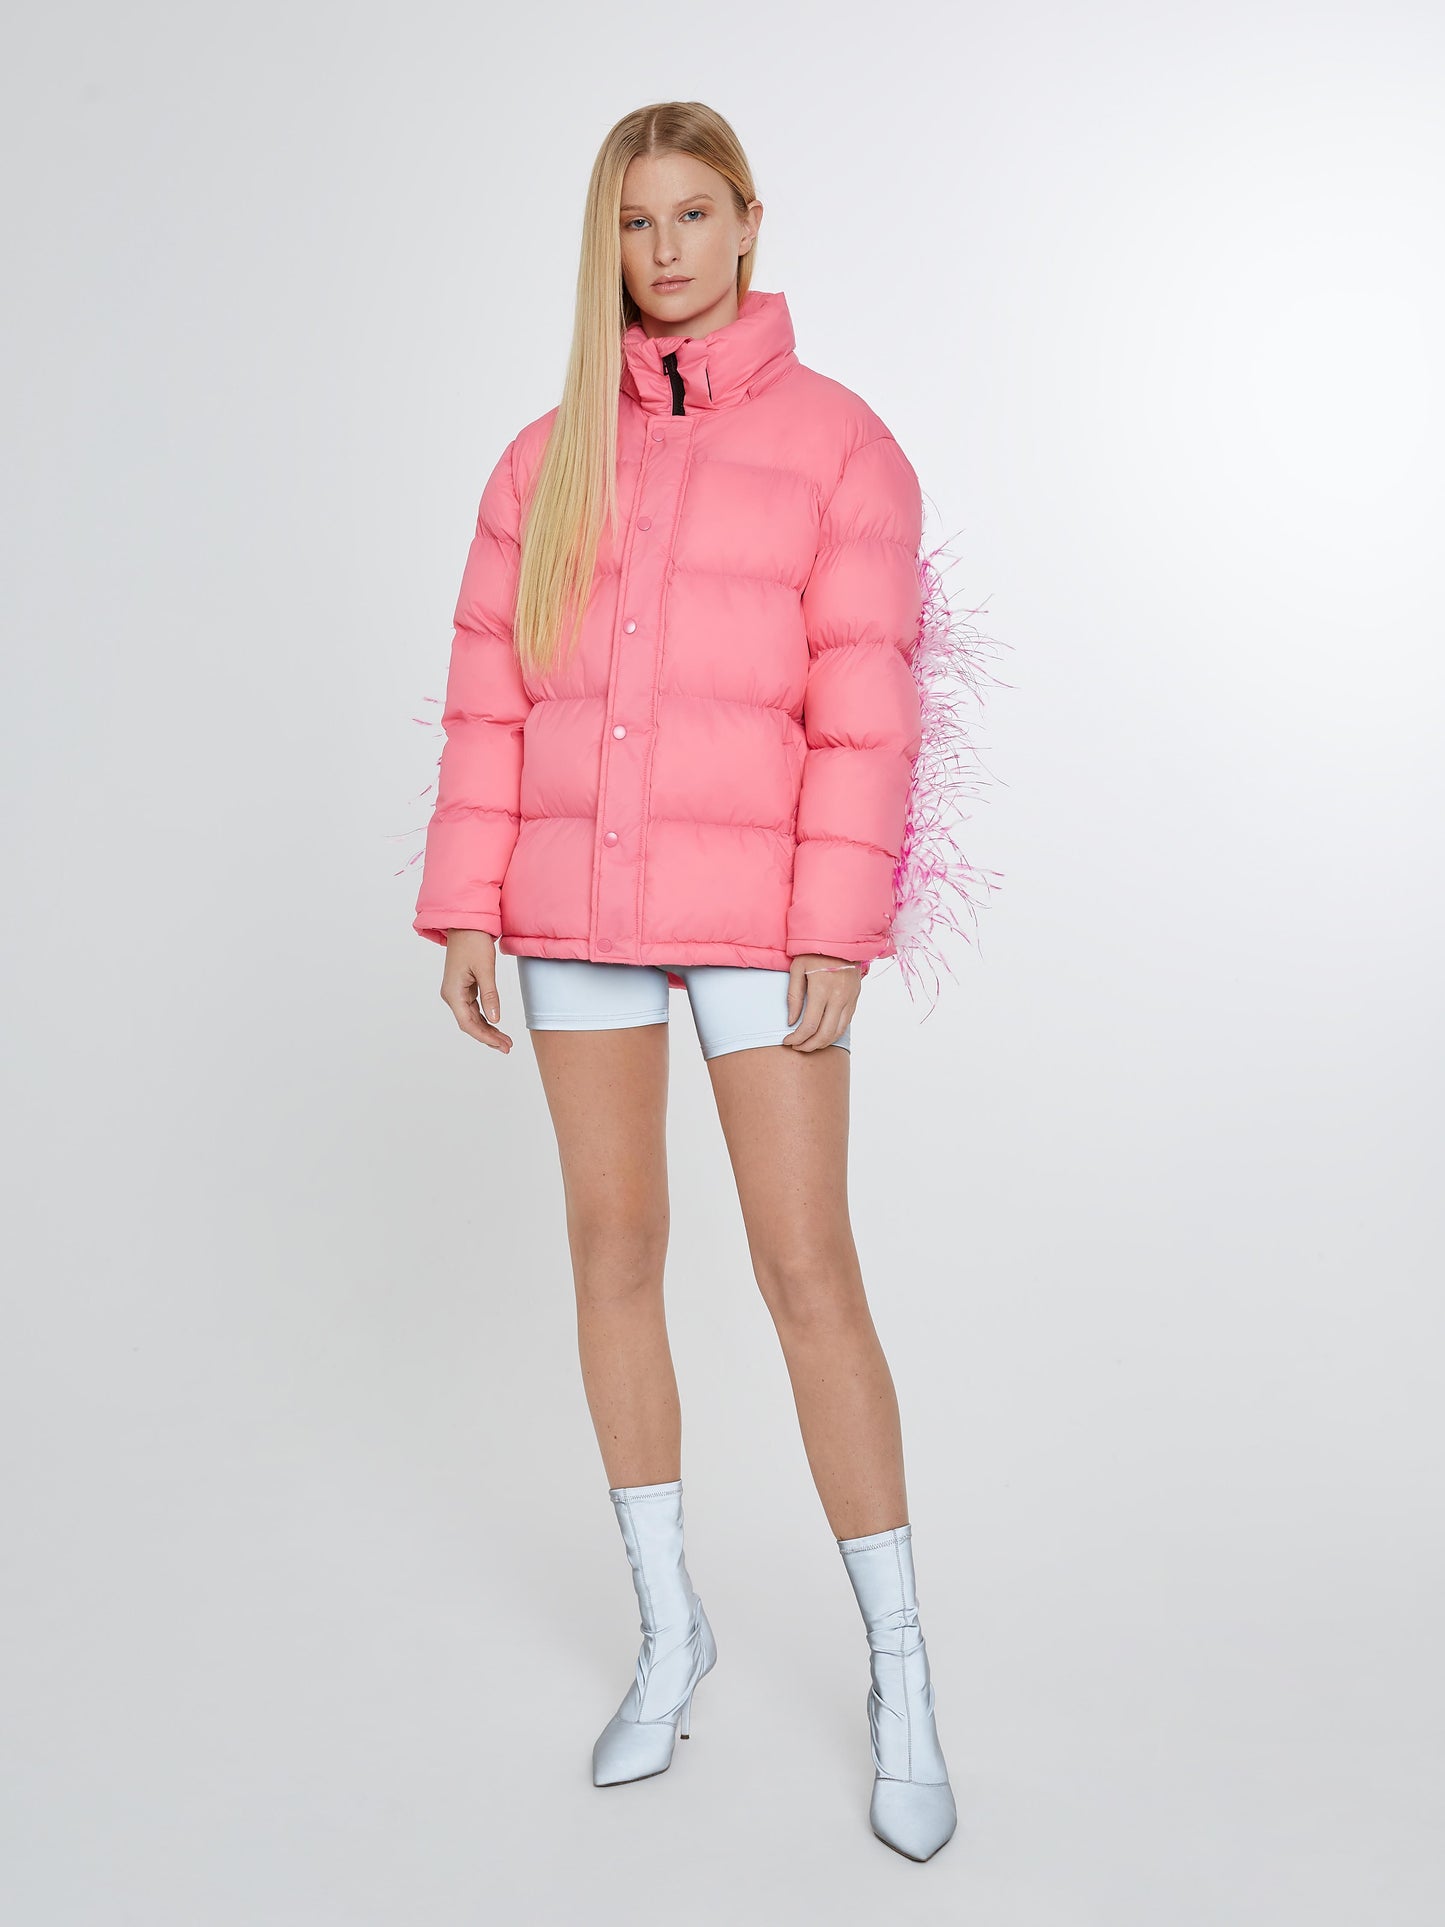 Pink puffer jacket with pink and white feathers